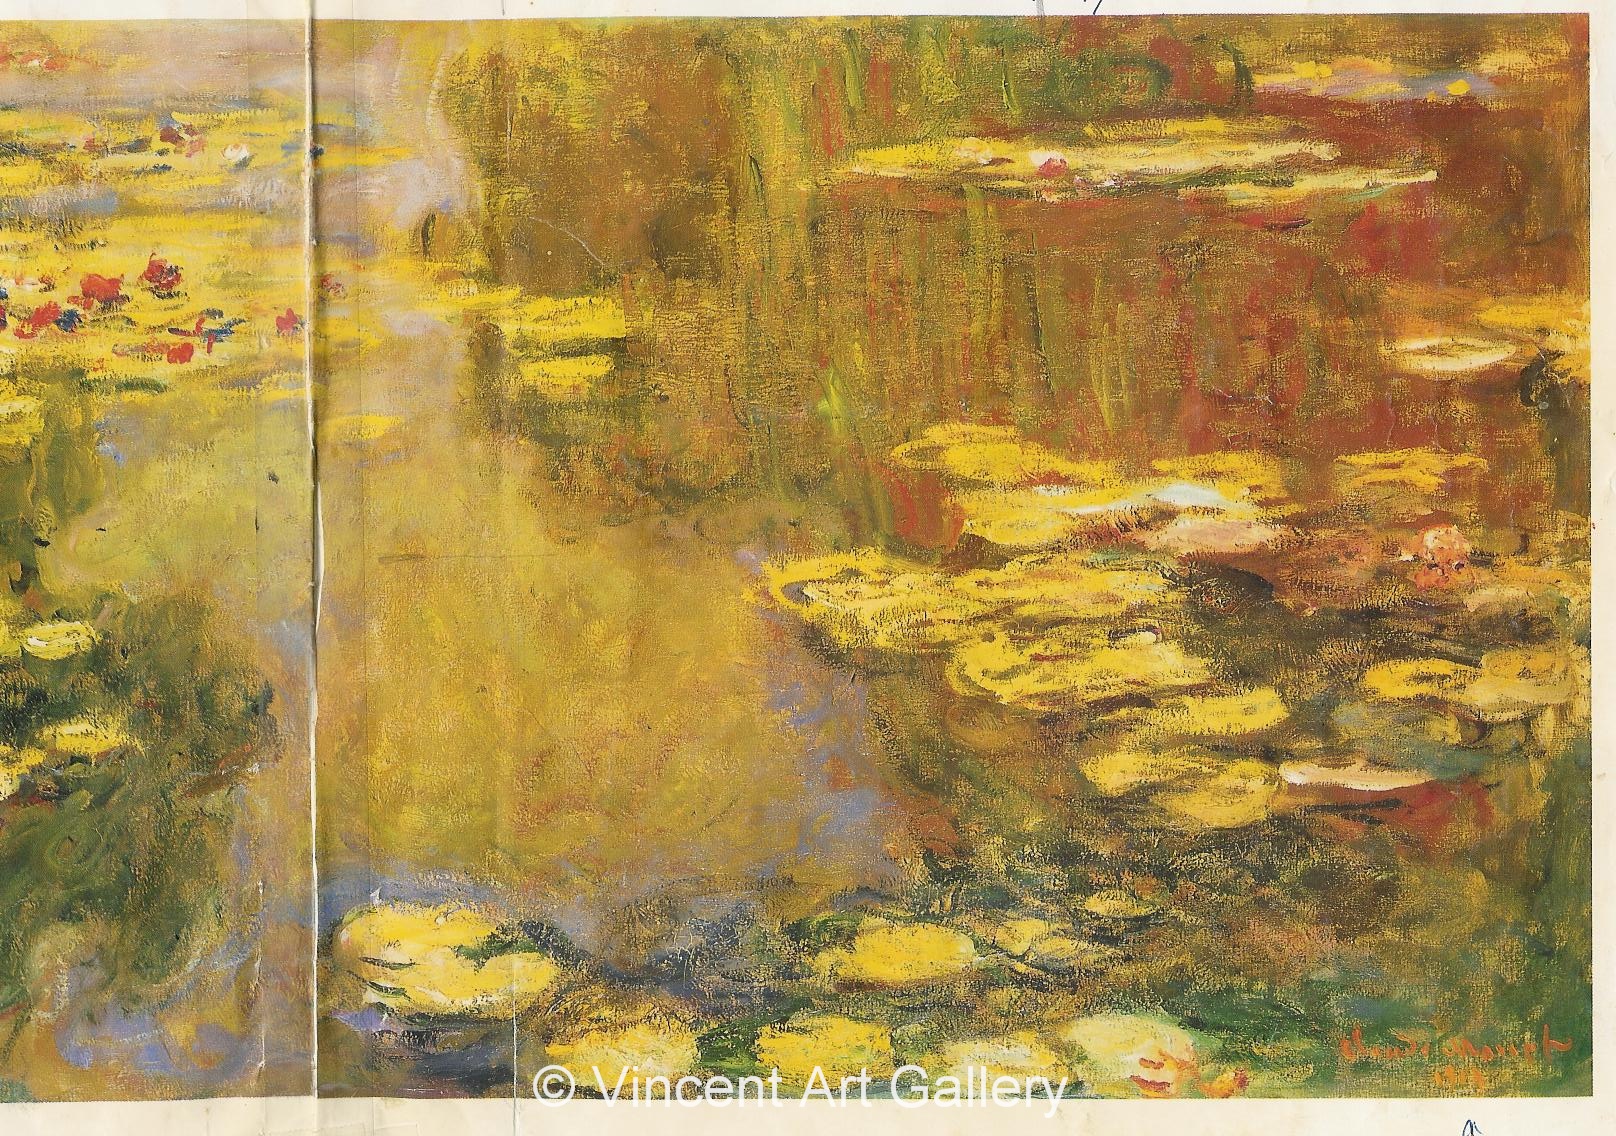 A2846, MONET, The Water-Lily Pond, RIGHT PART painting- 2